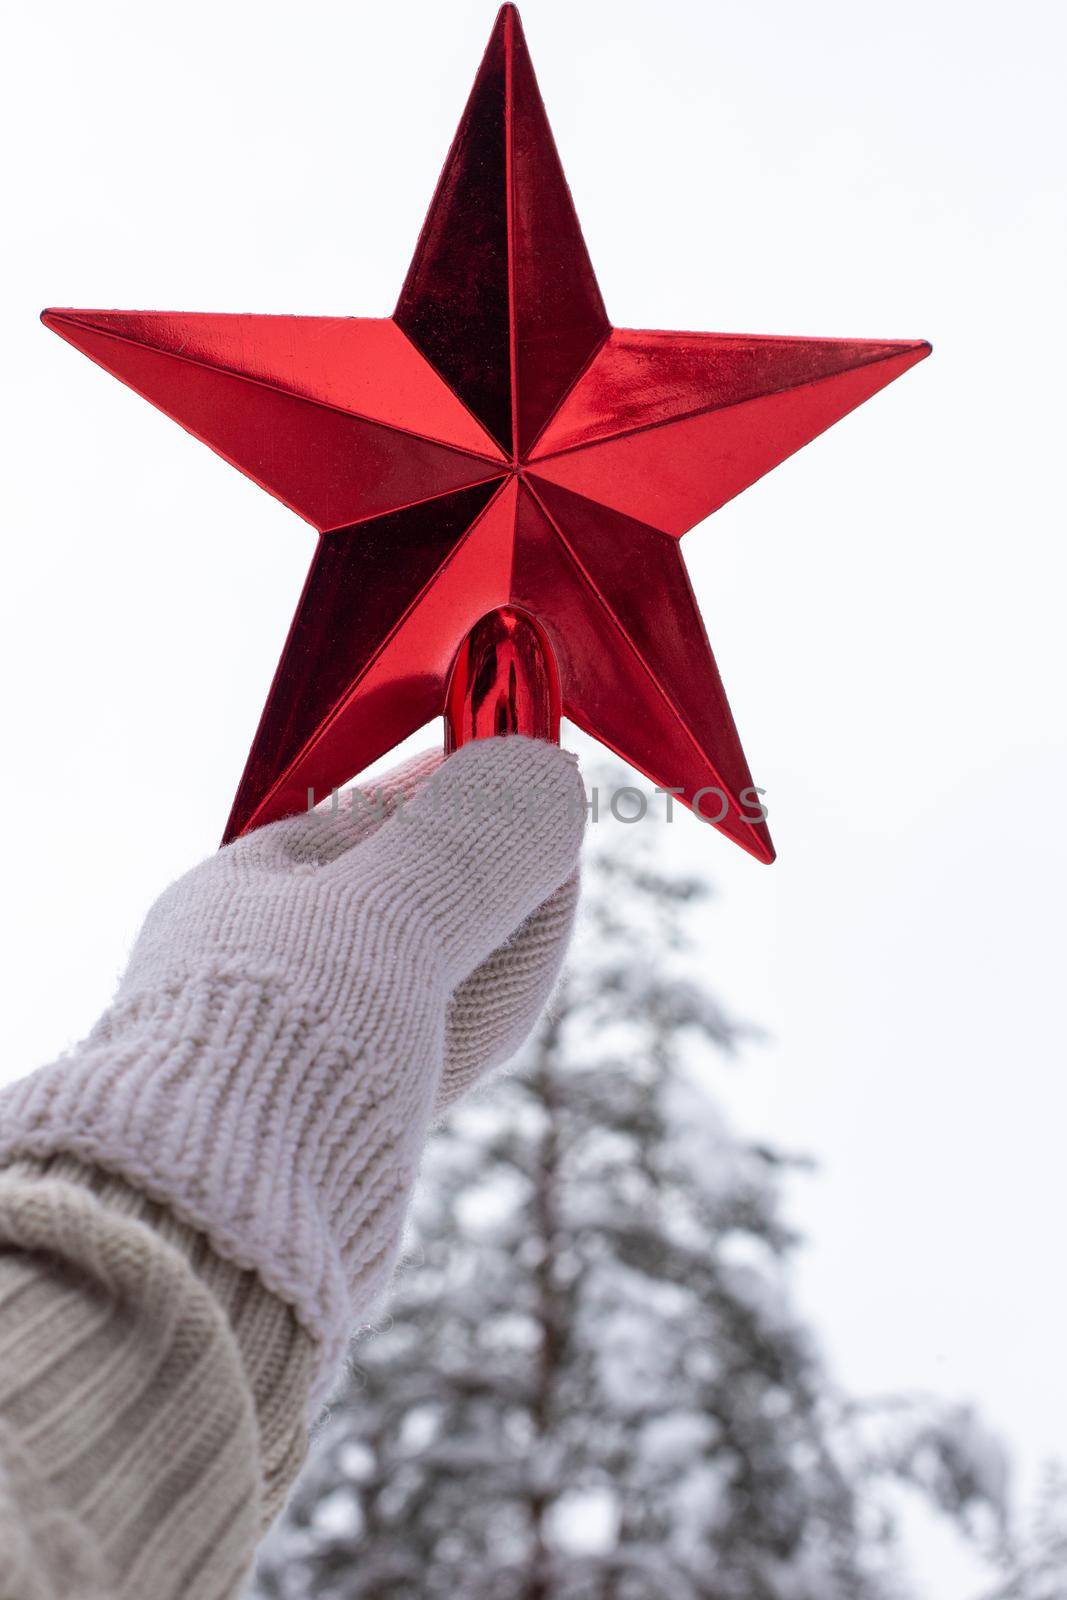 A hand in a white knitted mitten holds a red star over a snow pine tree in the forest. Vertical